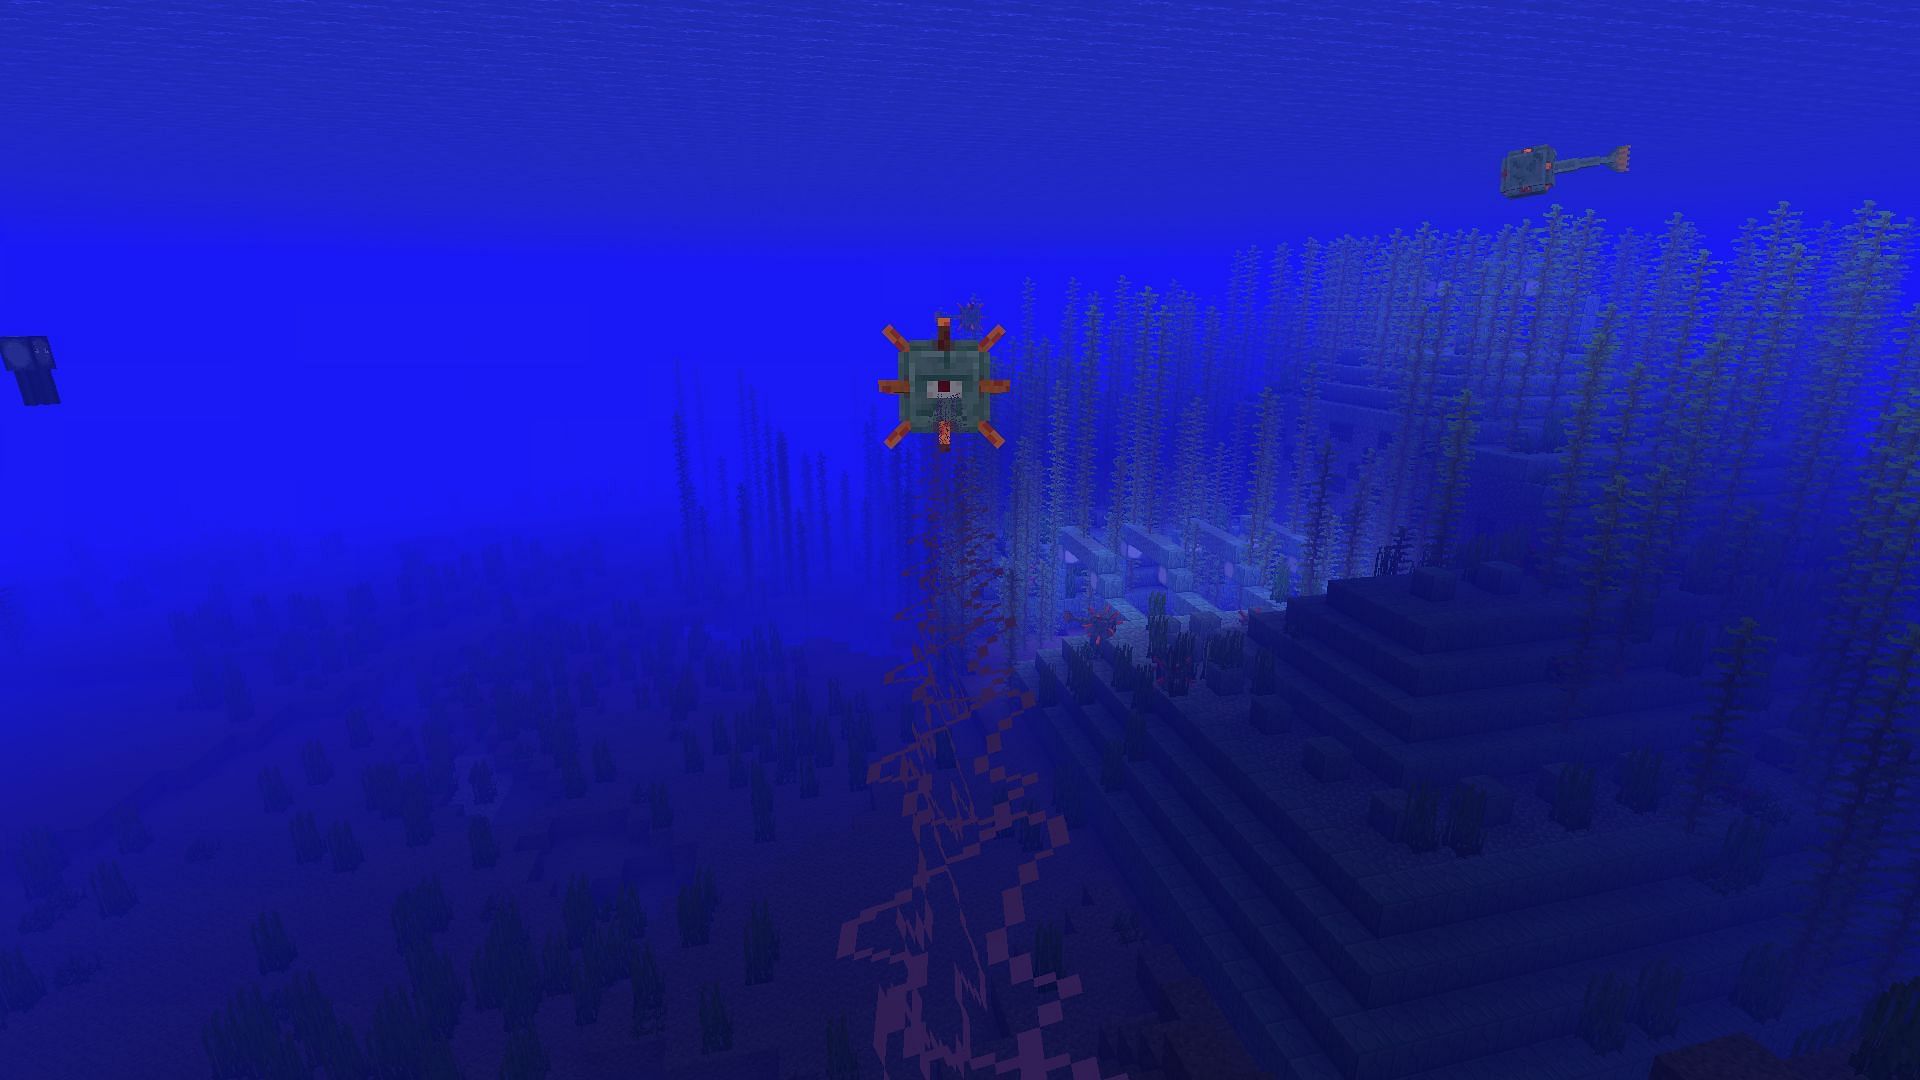 By using respiration enchantment, users also got enhanced underwater visibility in Minecraft Pocket Edition. (Image via Mojang)